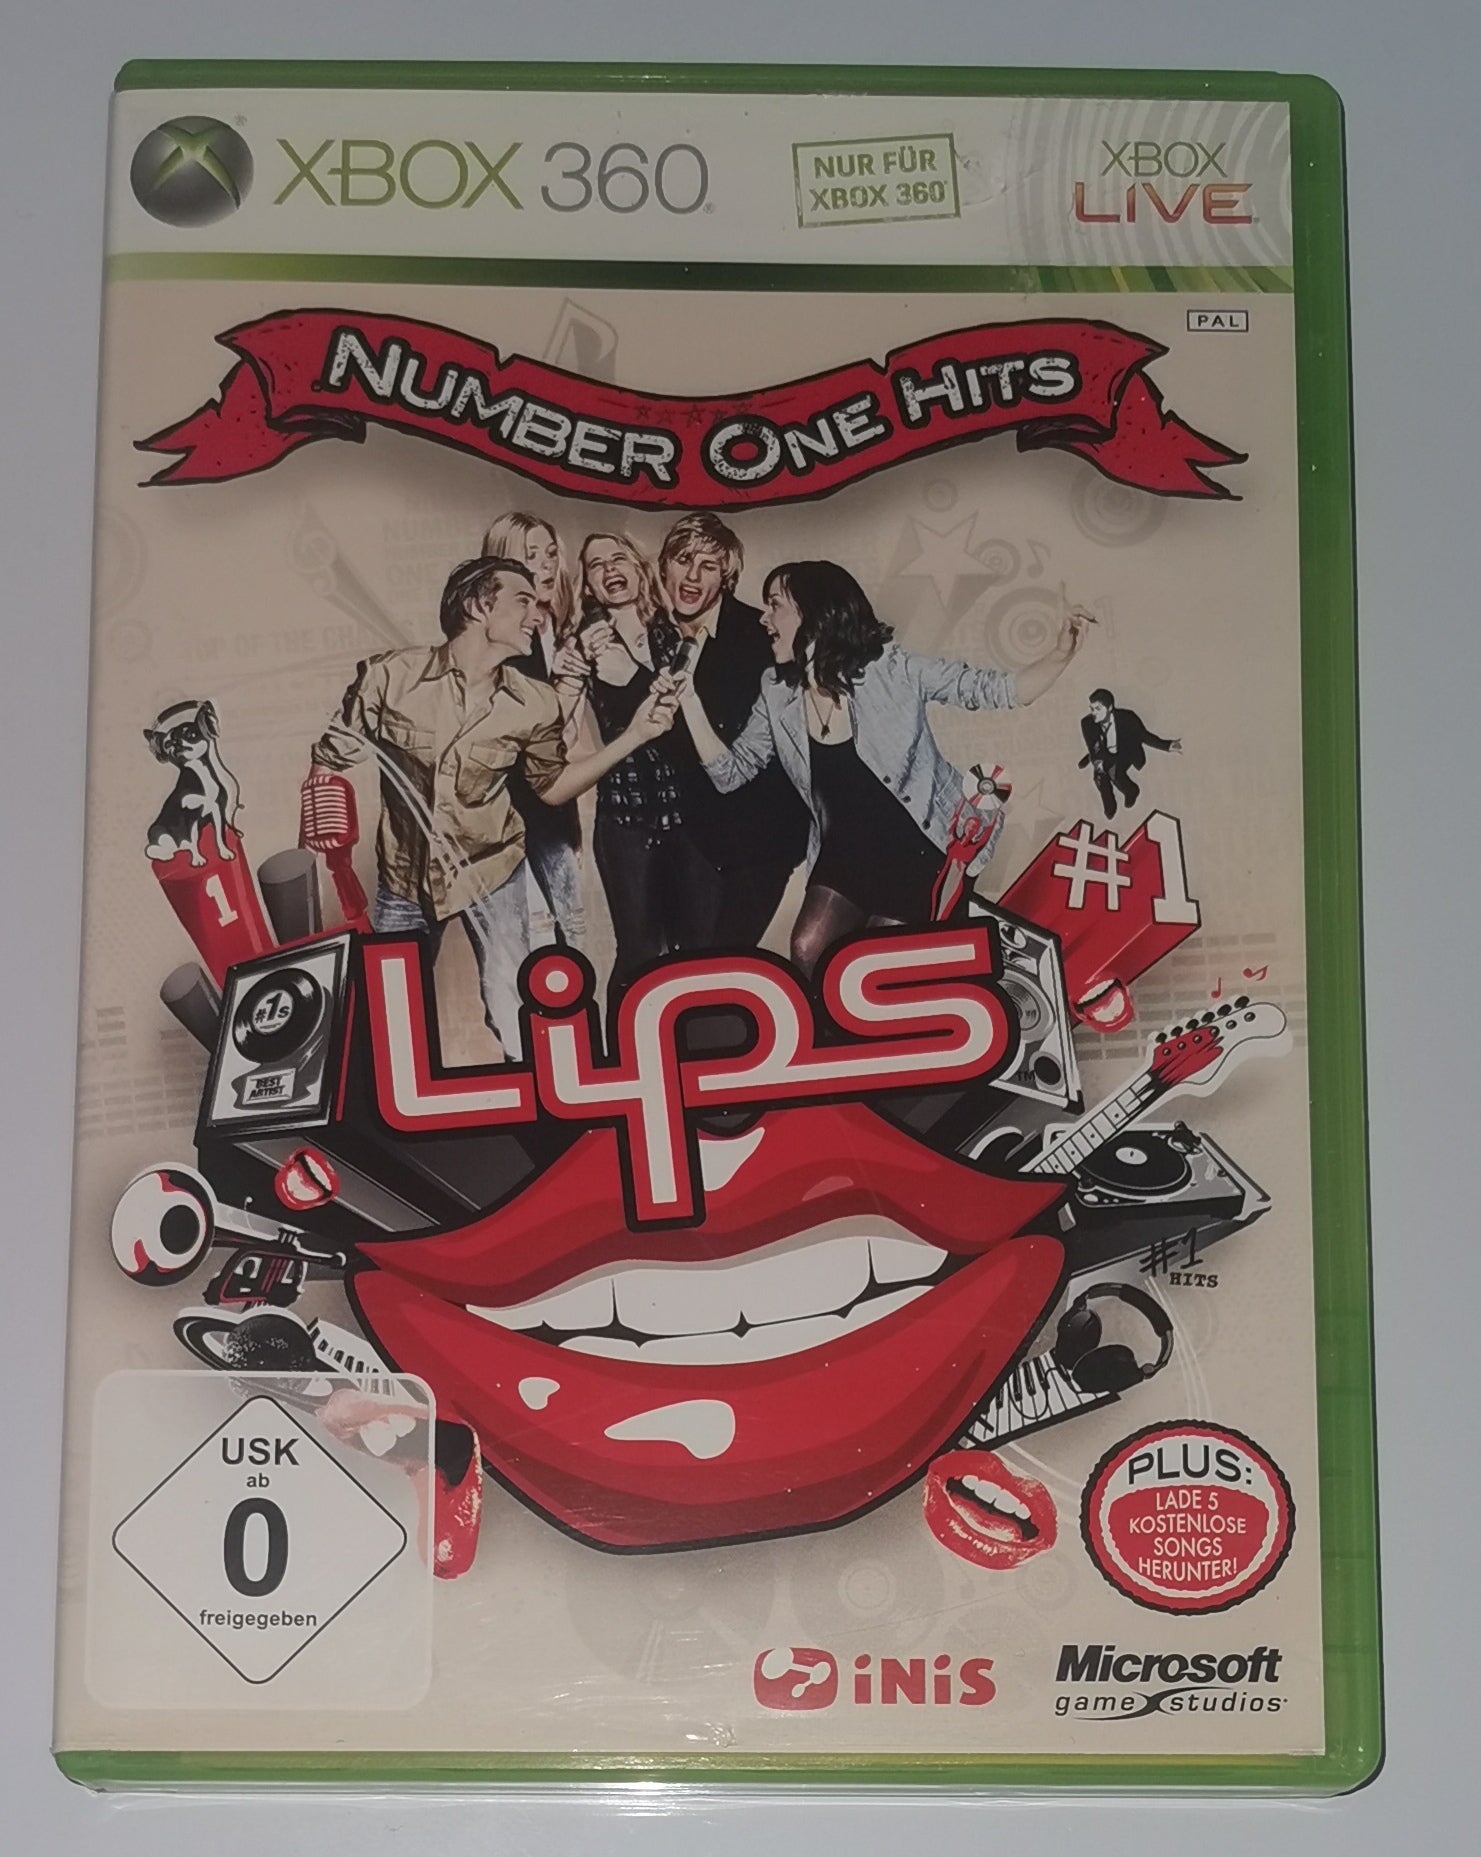 Lips Number One Hits Bundle fuer Xbox 360 [Gut]